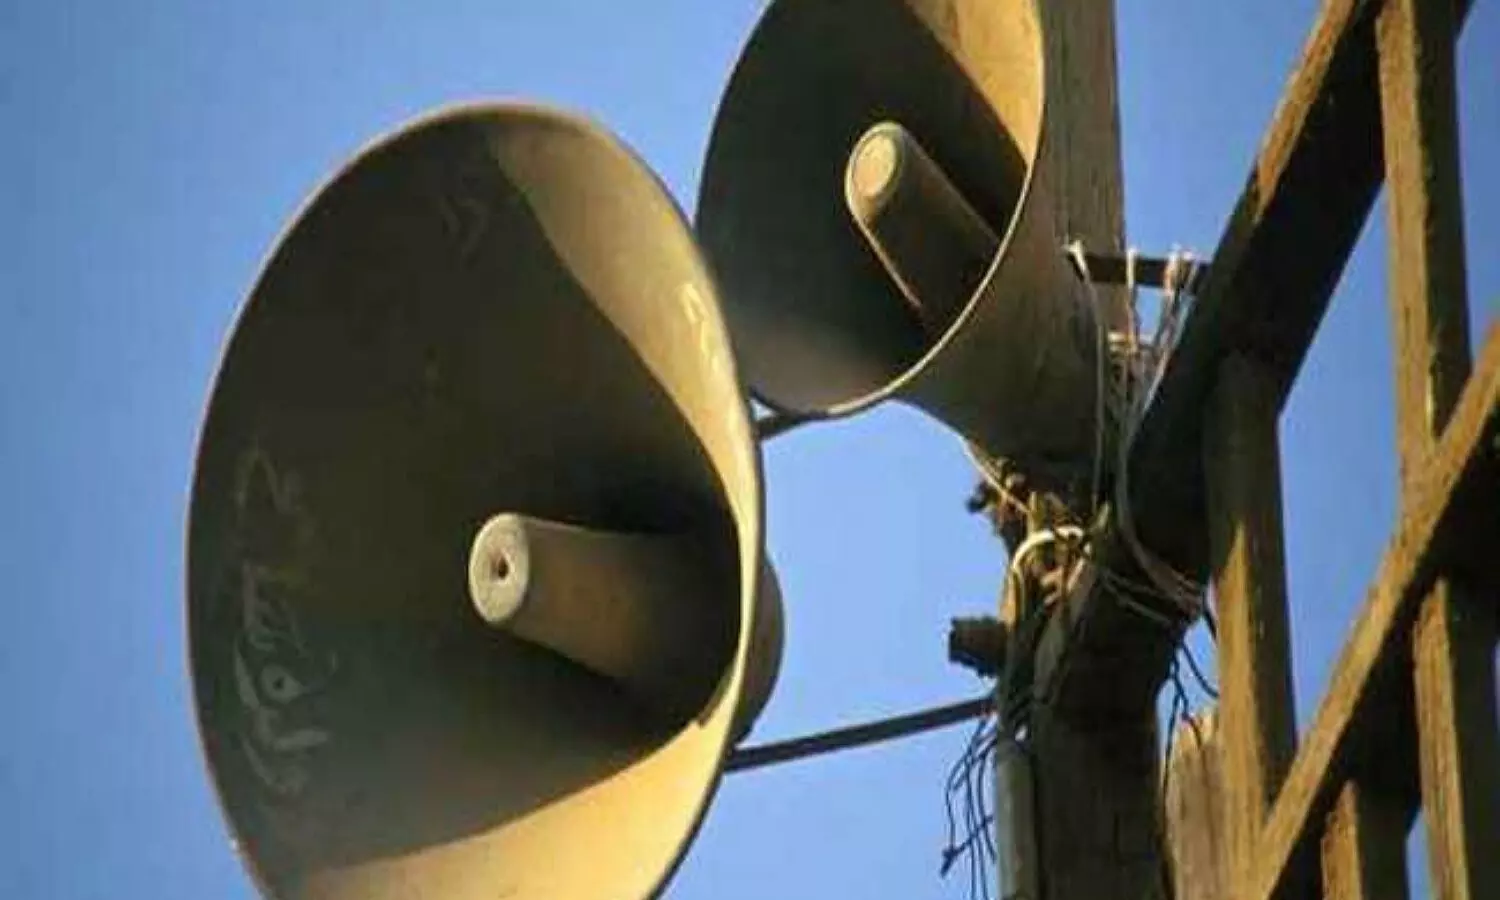 Demand for Remove mosques loudspeakers